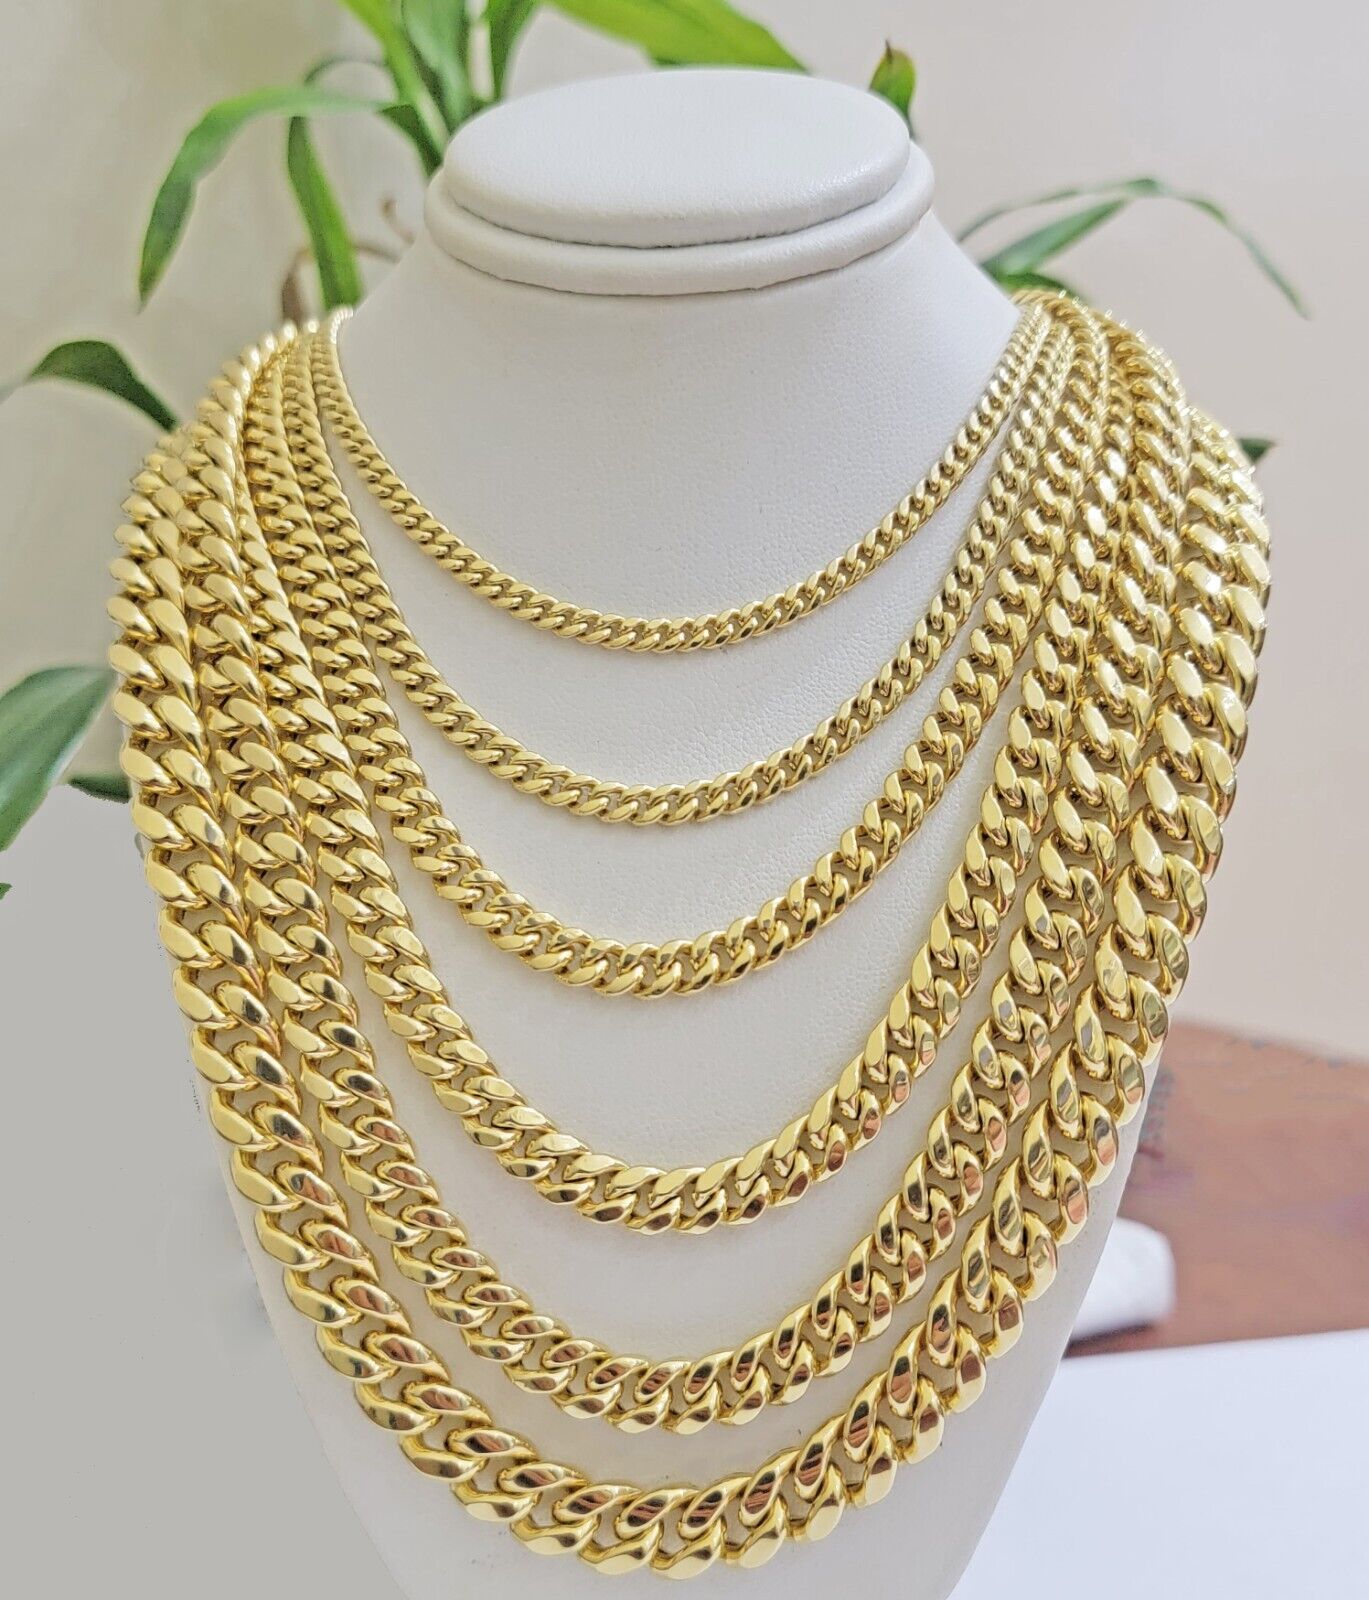 Real 10k Gold Chain Necklace Miami Cuban Link 22" Inch 8mm SEPARATE LISTING SALE